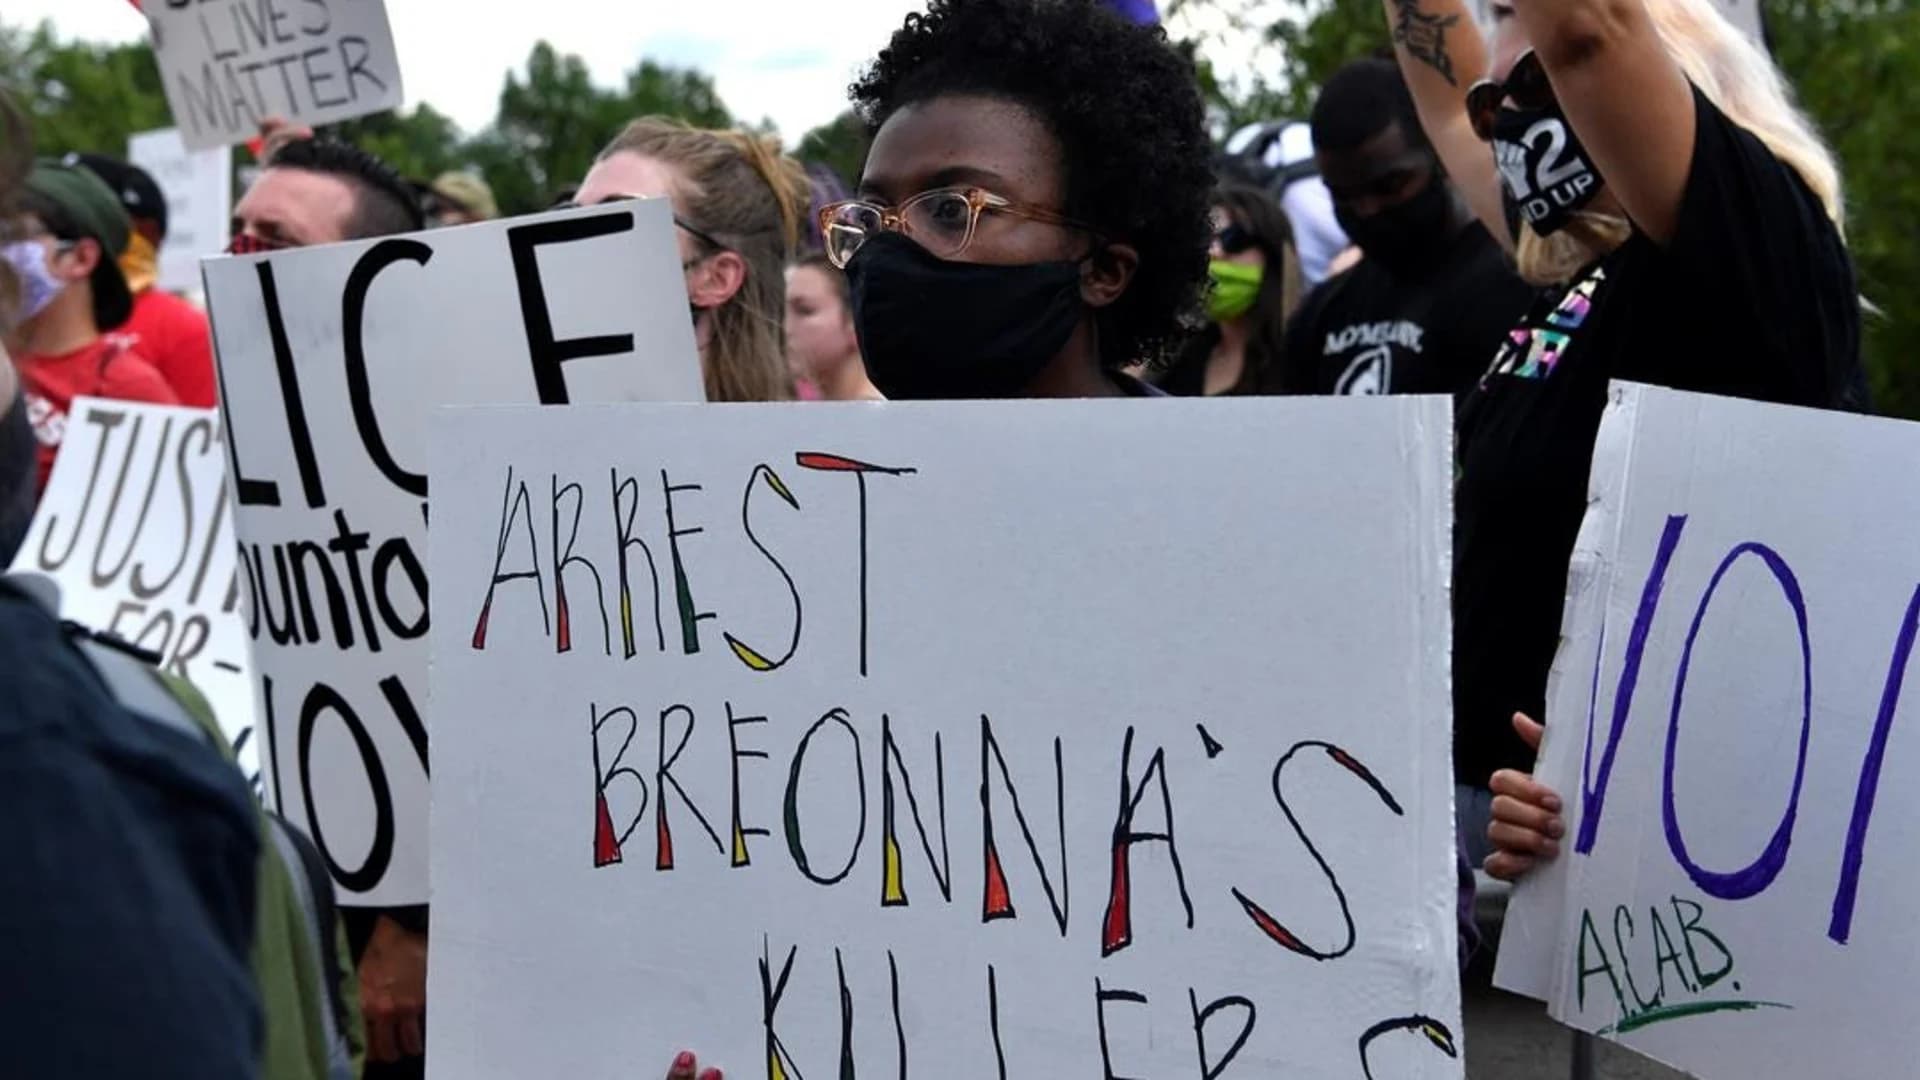 Authorities: 1 fatally shot at Breonna Taylor protest at park in Kentucky